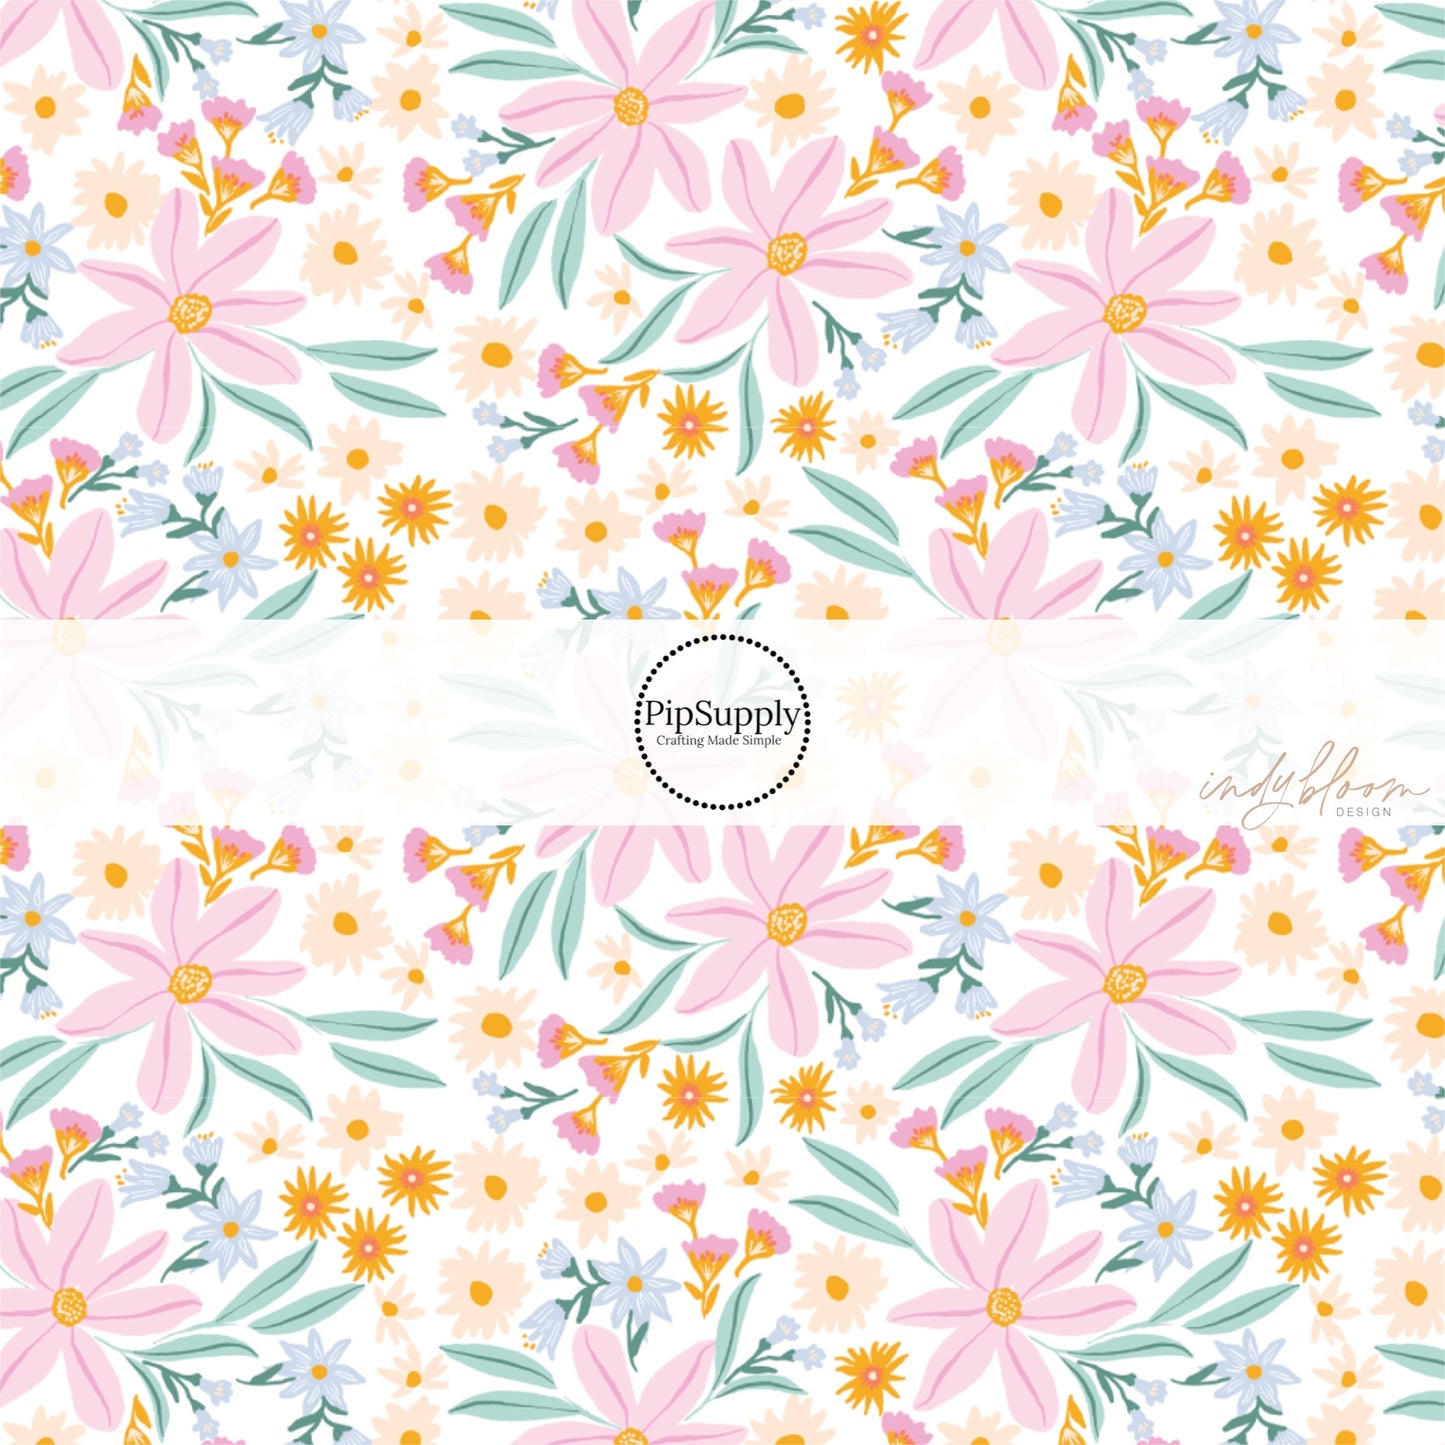 Pink, peach, and blue floral designs on white fabric by the yard.